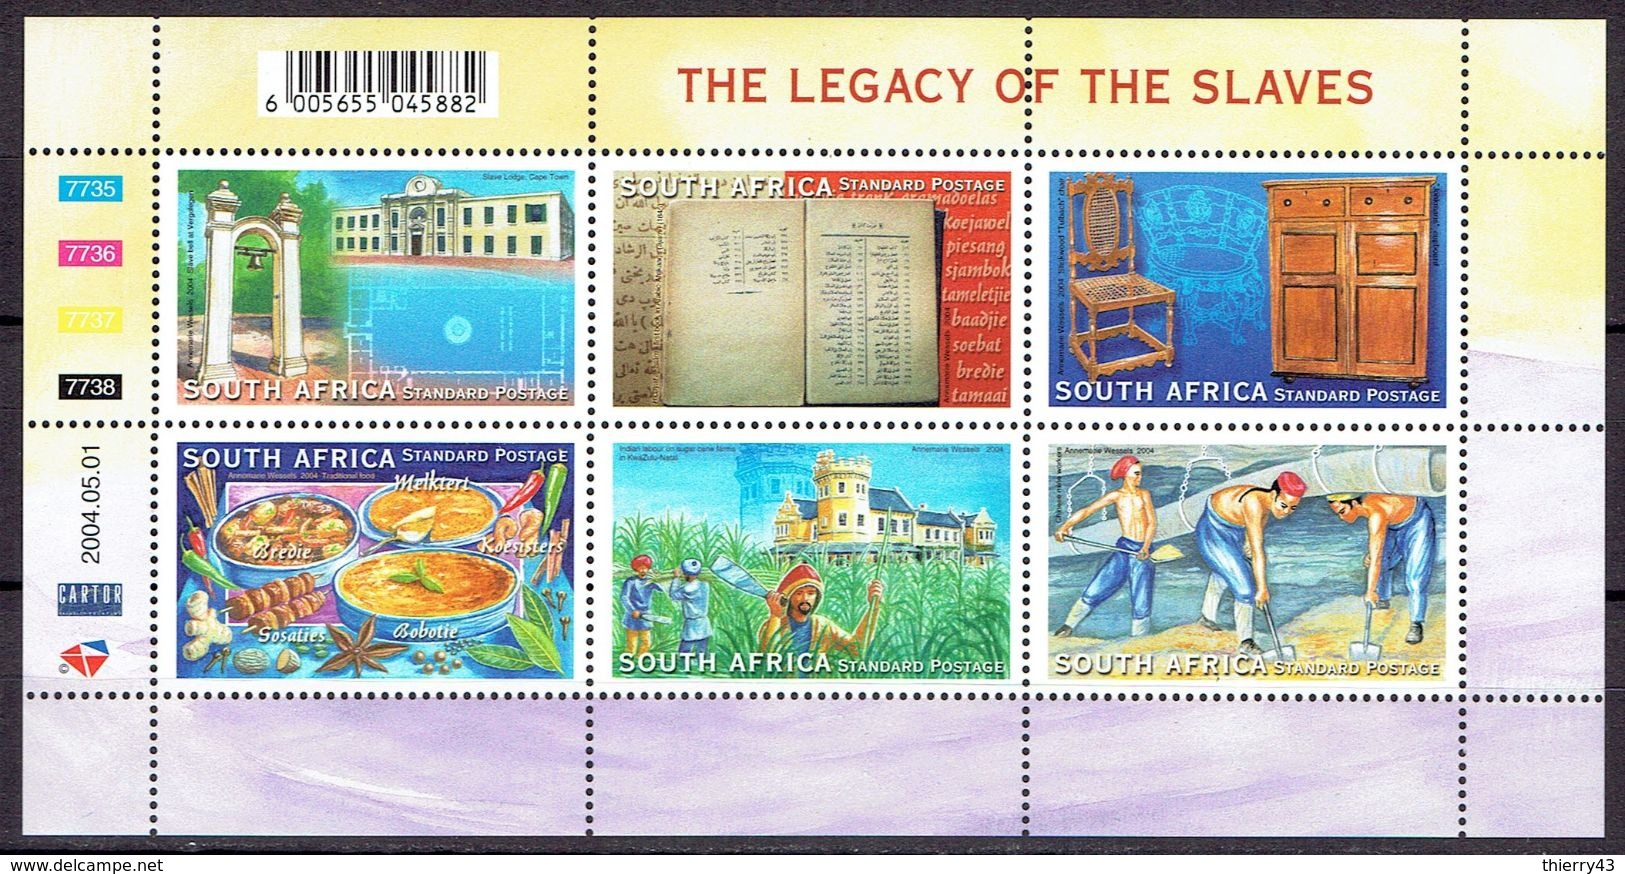 South Africa 2004 - The Legacy Of The Slaves, Sheet - Michel 1558-63 -  MNH, NEUF, Postfrisch - Unused Stamps